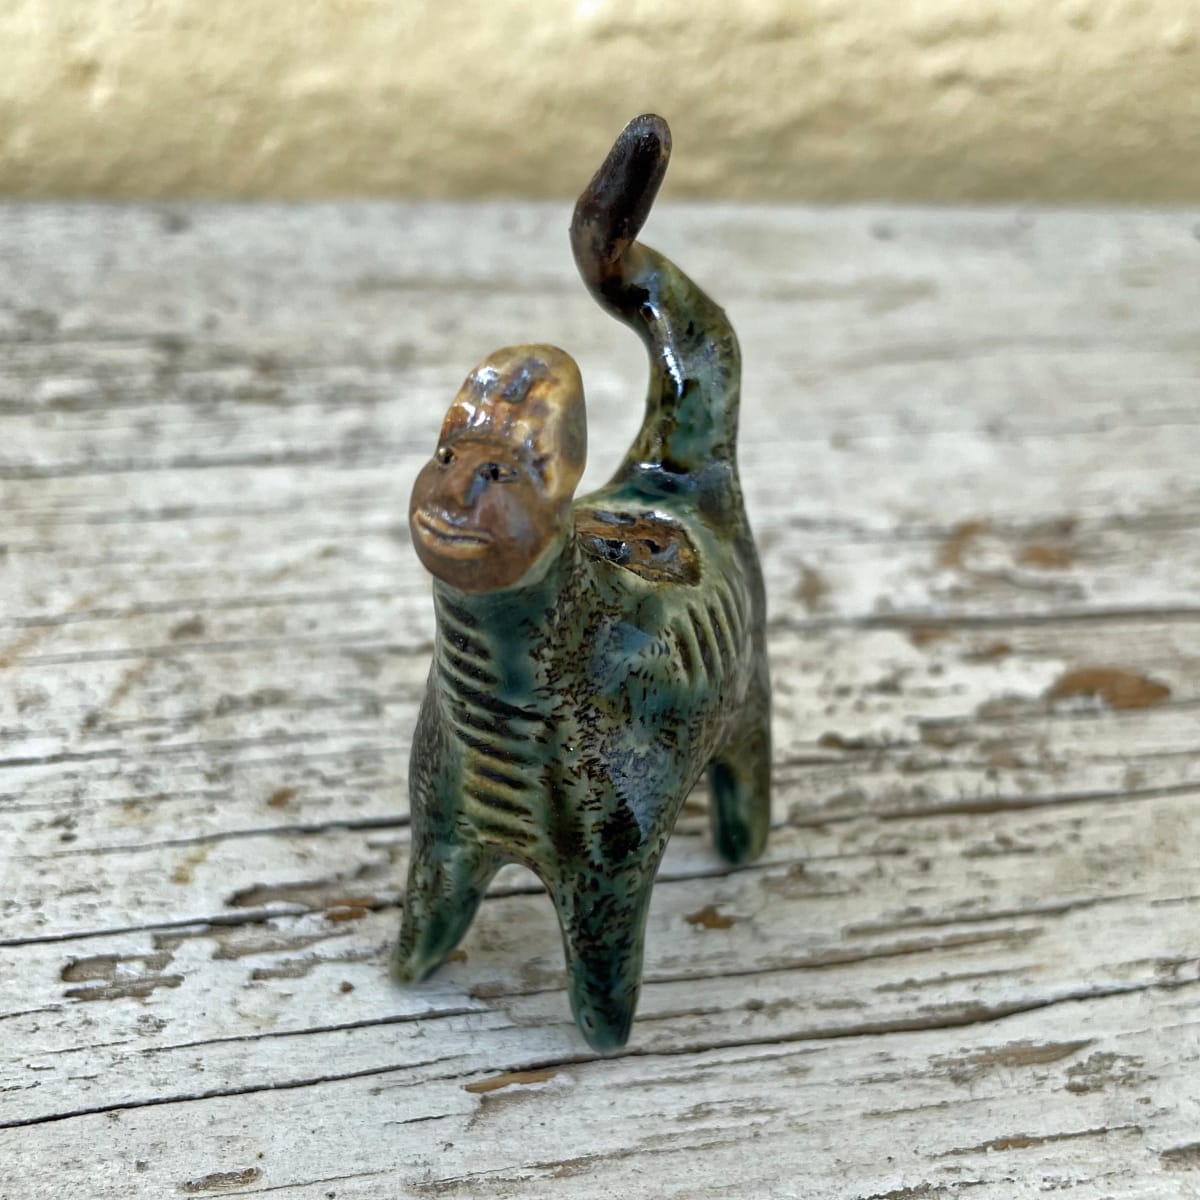 Etched and detailed teeny bowl unicorn by Nell Eakin 